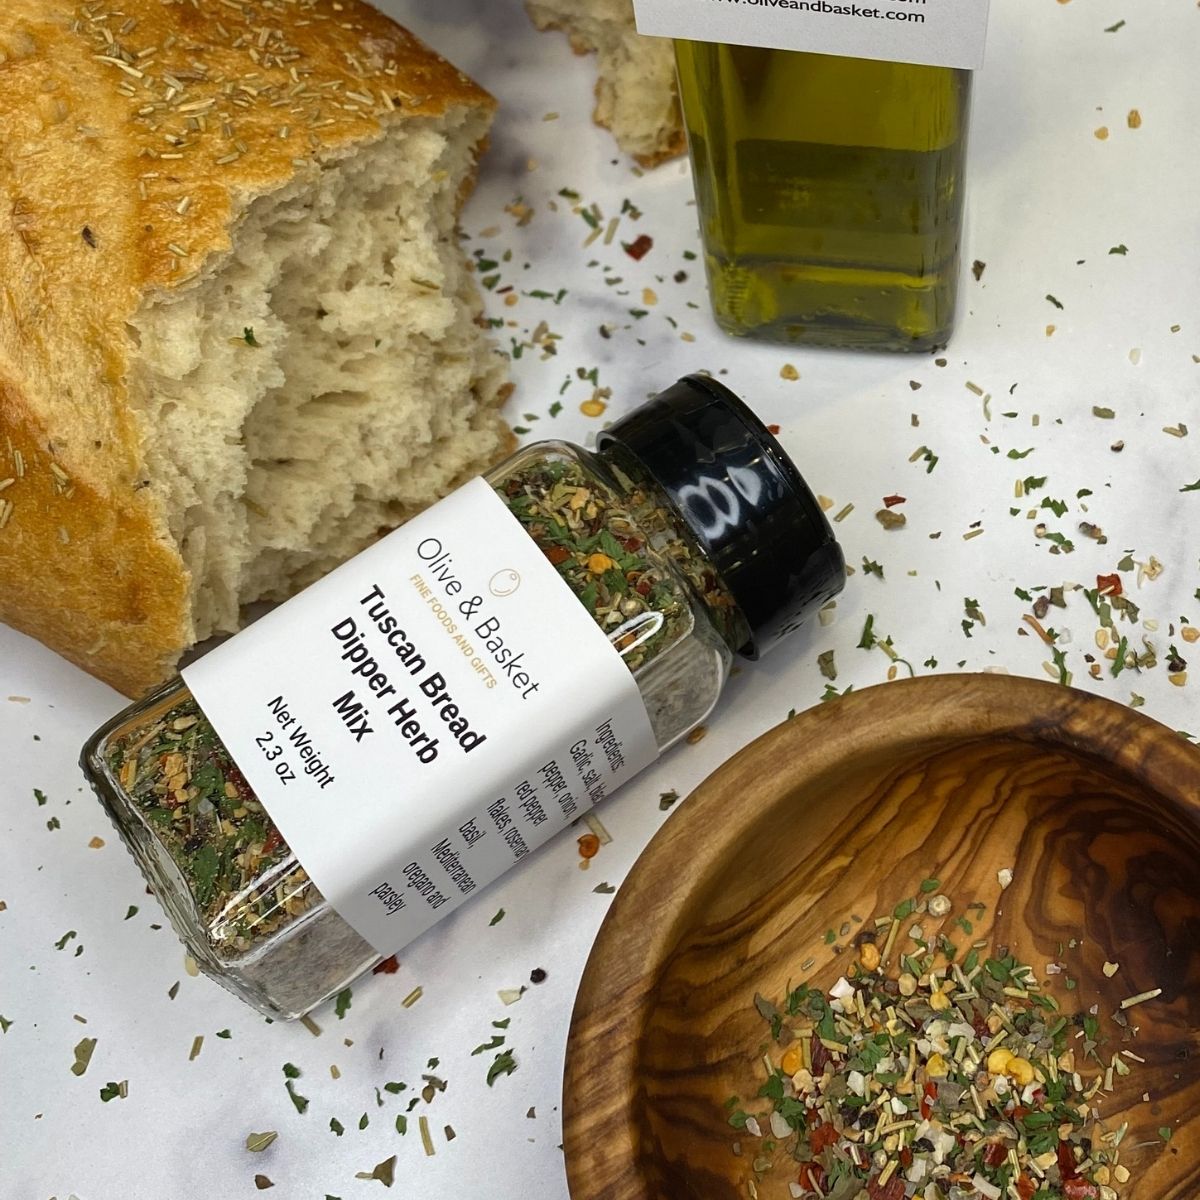 Tuscan Bread Dipper Herb Mix (Hand Blended)